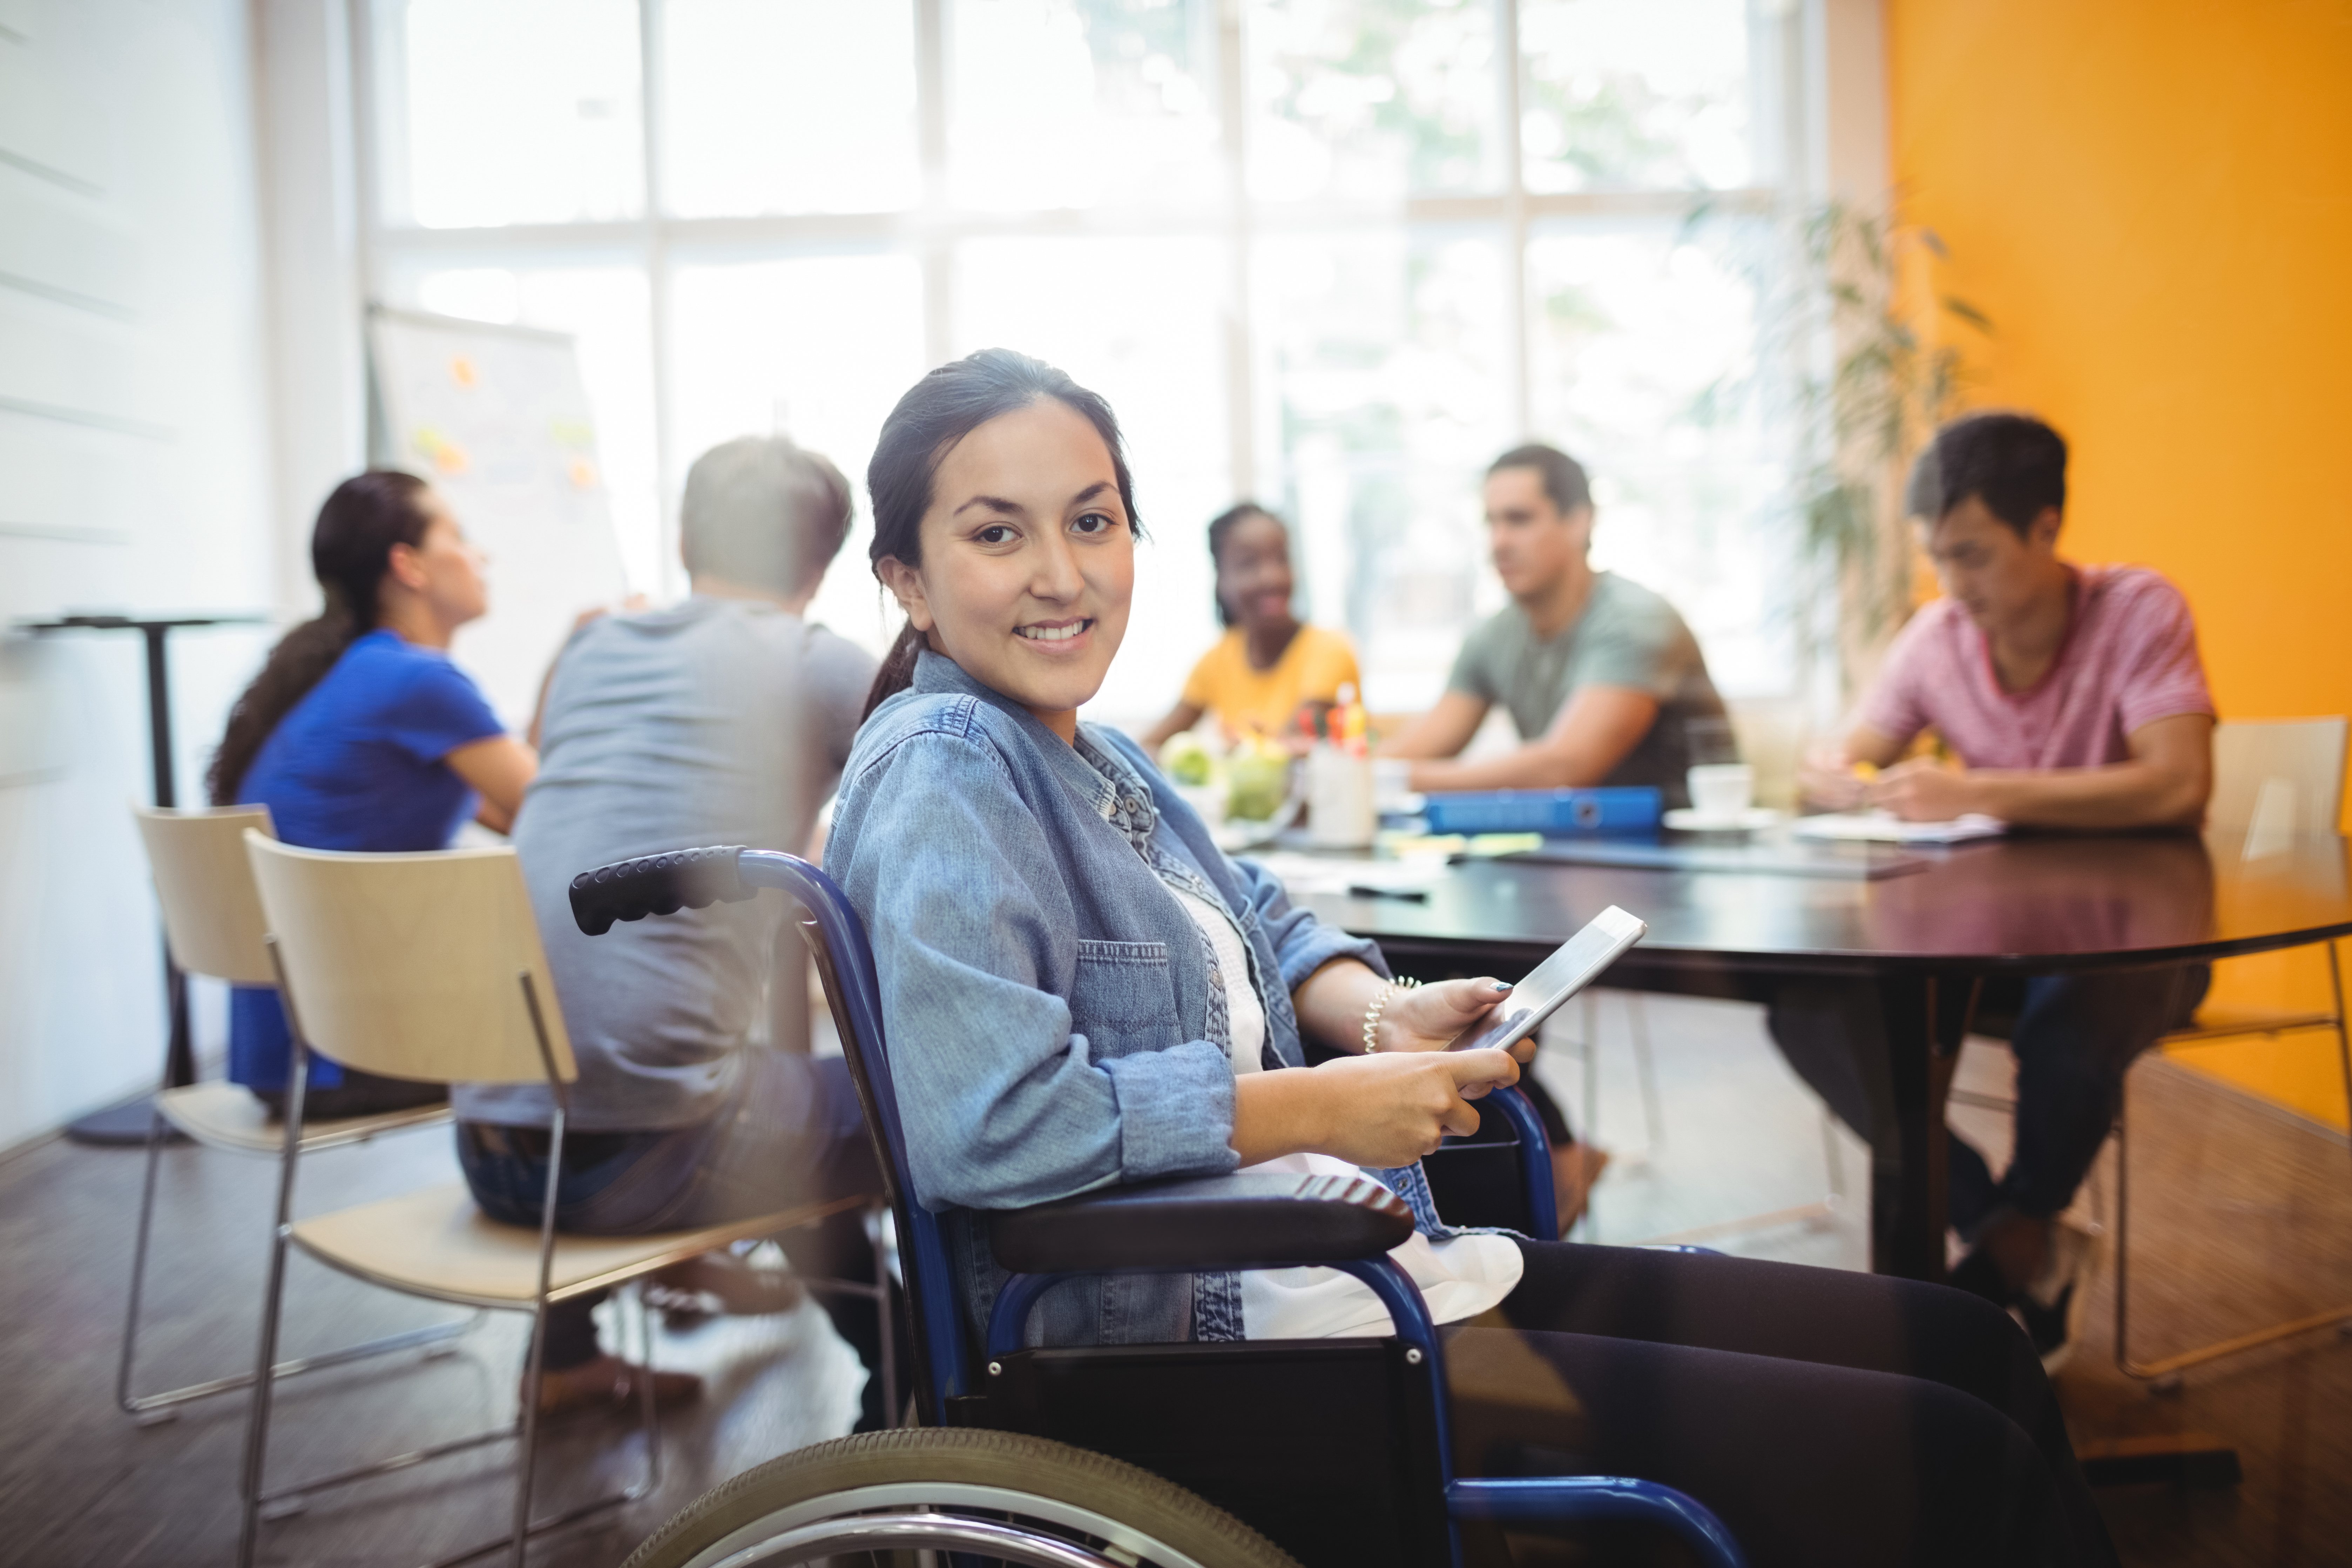 A woman in a wheelchair smiling during a business meeting